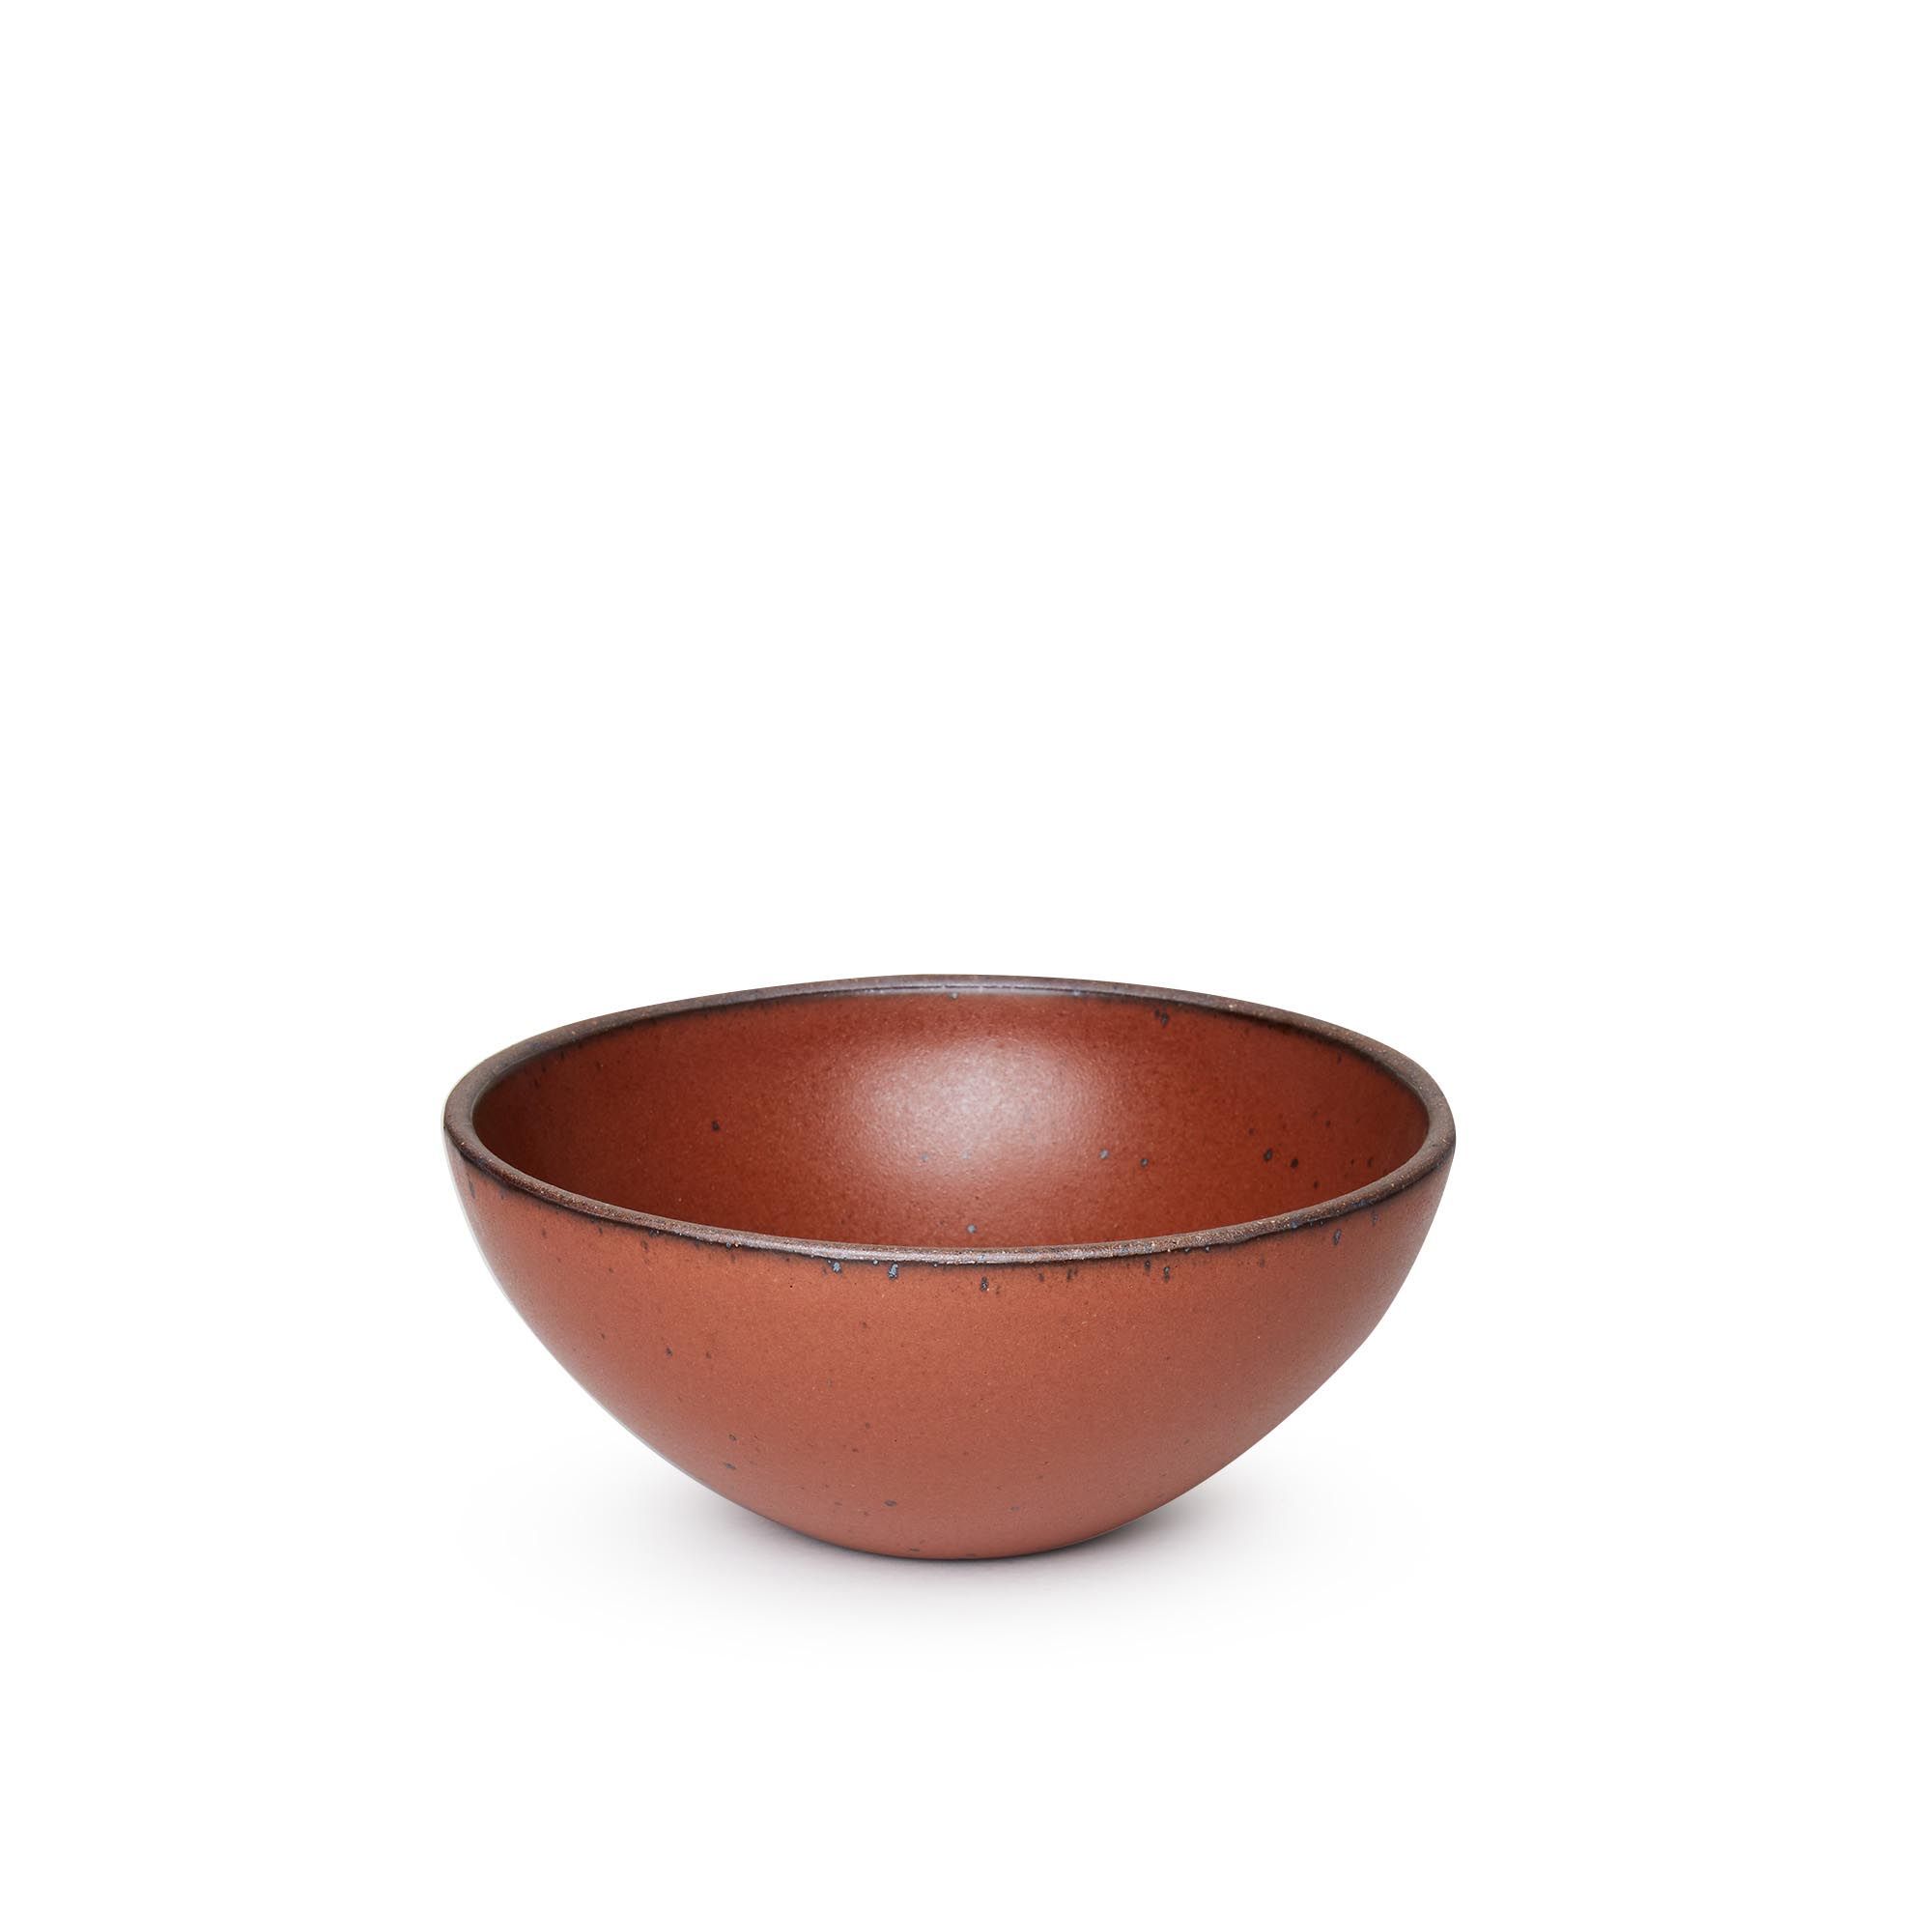 A medium rounded ceramic bowl in a cool burnt terracotta color featuring iron speckles and an unglazed rim